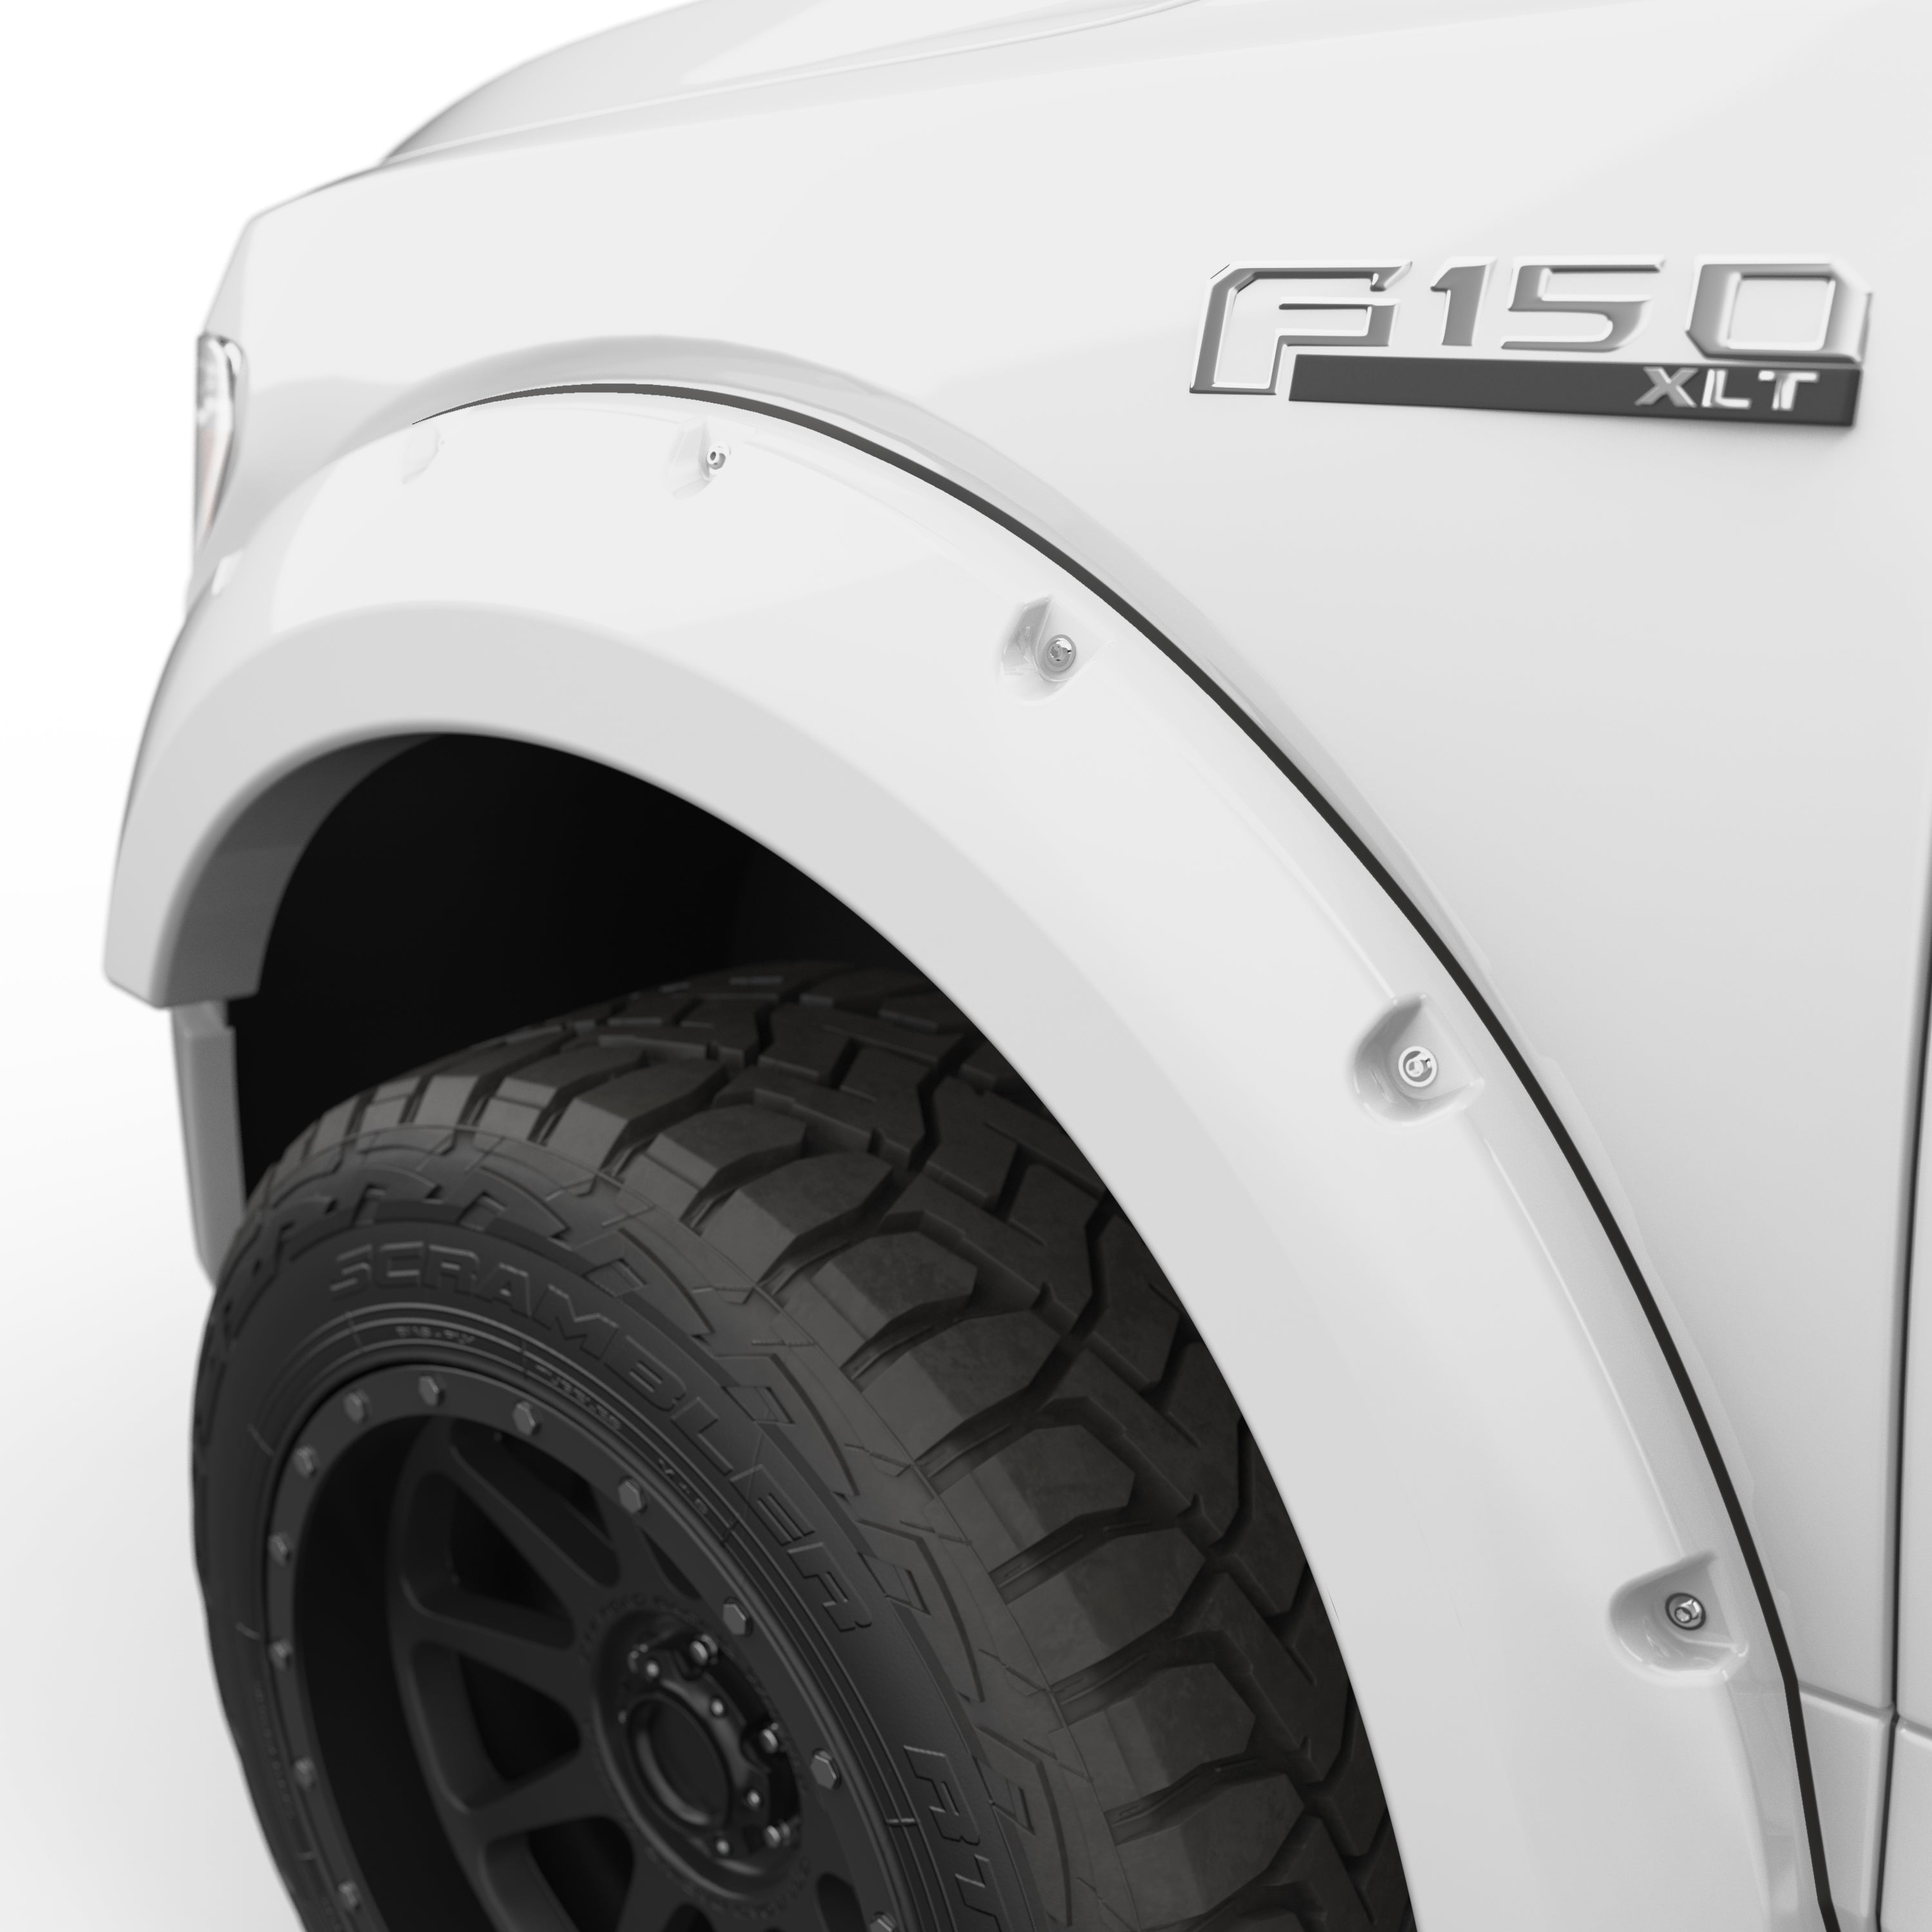 EGR 2015-2017 Ford F-150 2 & 4 Door Crew Cab Standard Cab Extended Cab Pickup Traditional Bolt-on look Fender Flares set of 4 Painted to Code Oxford White 793474-Z1